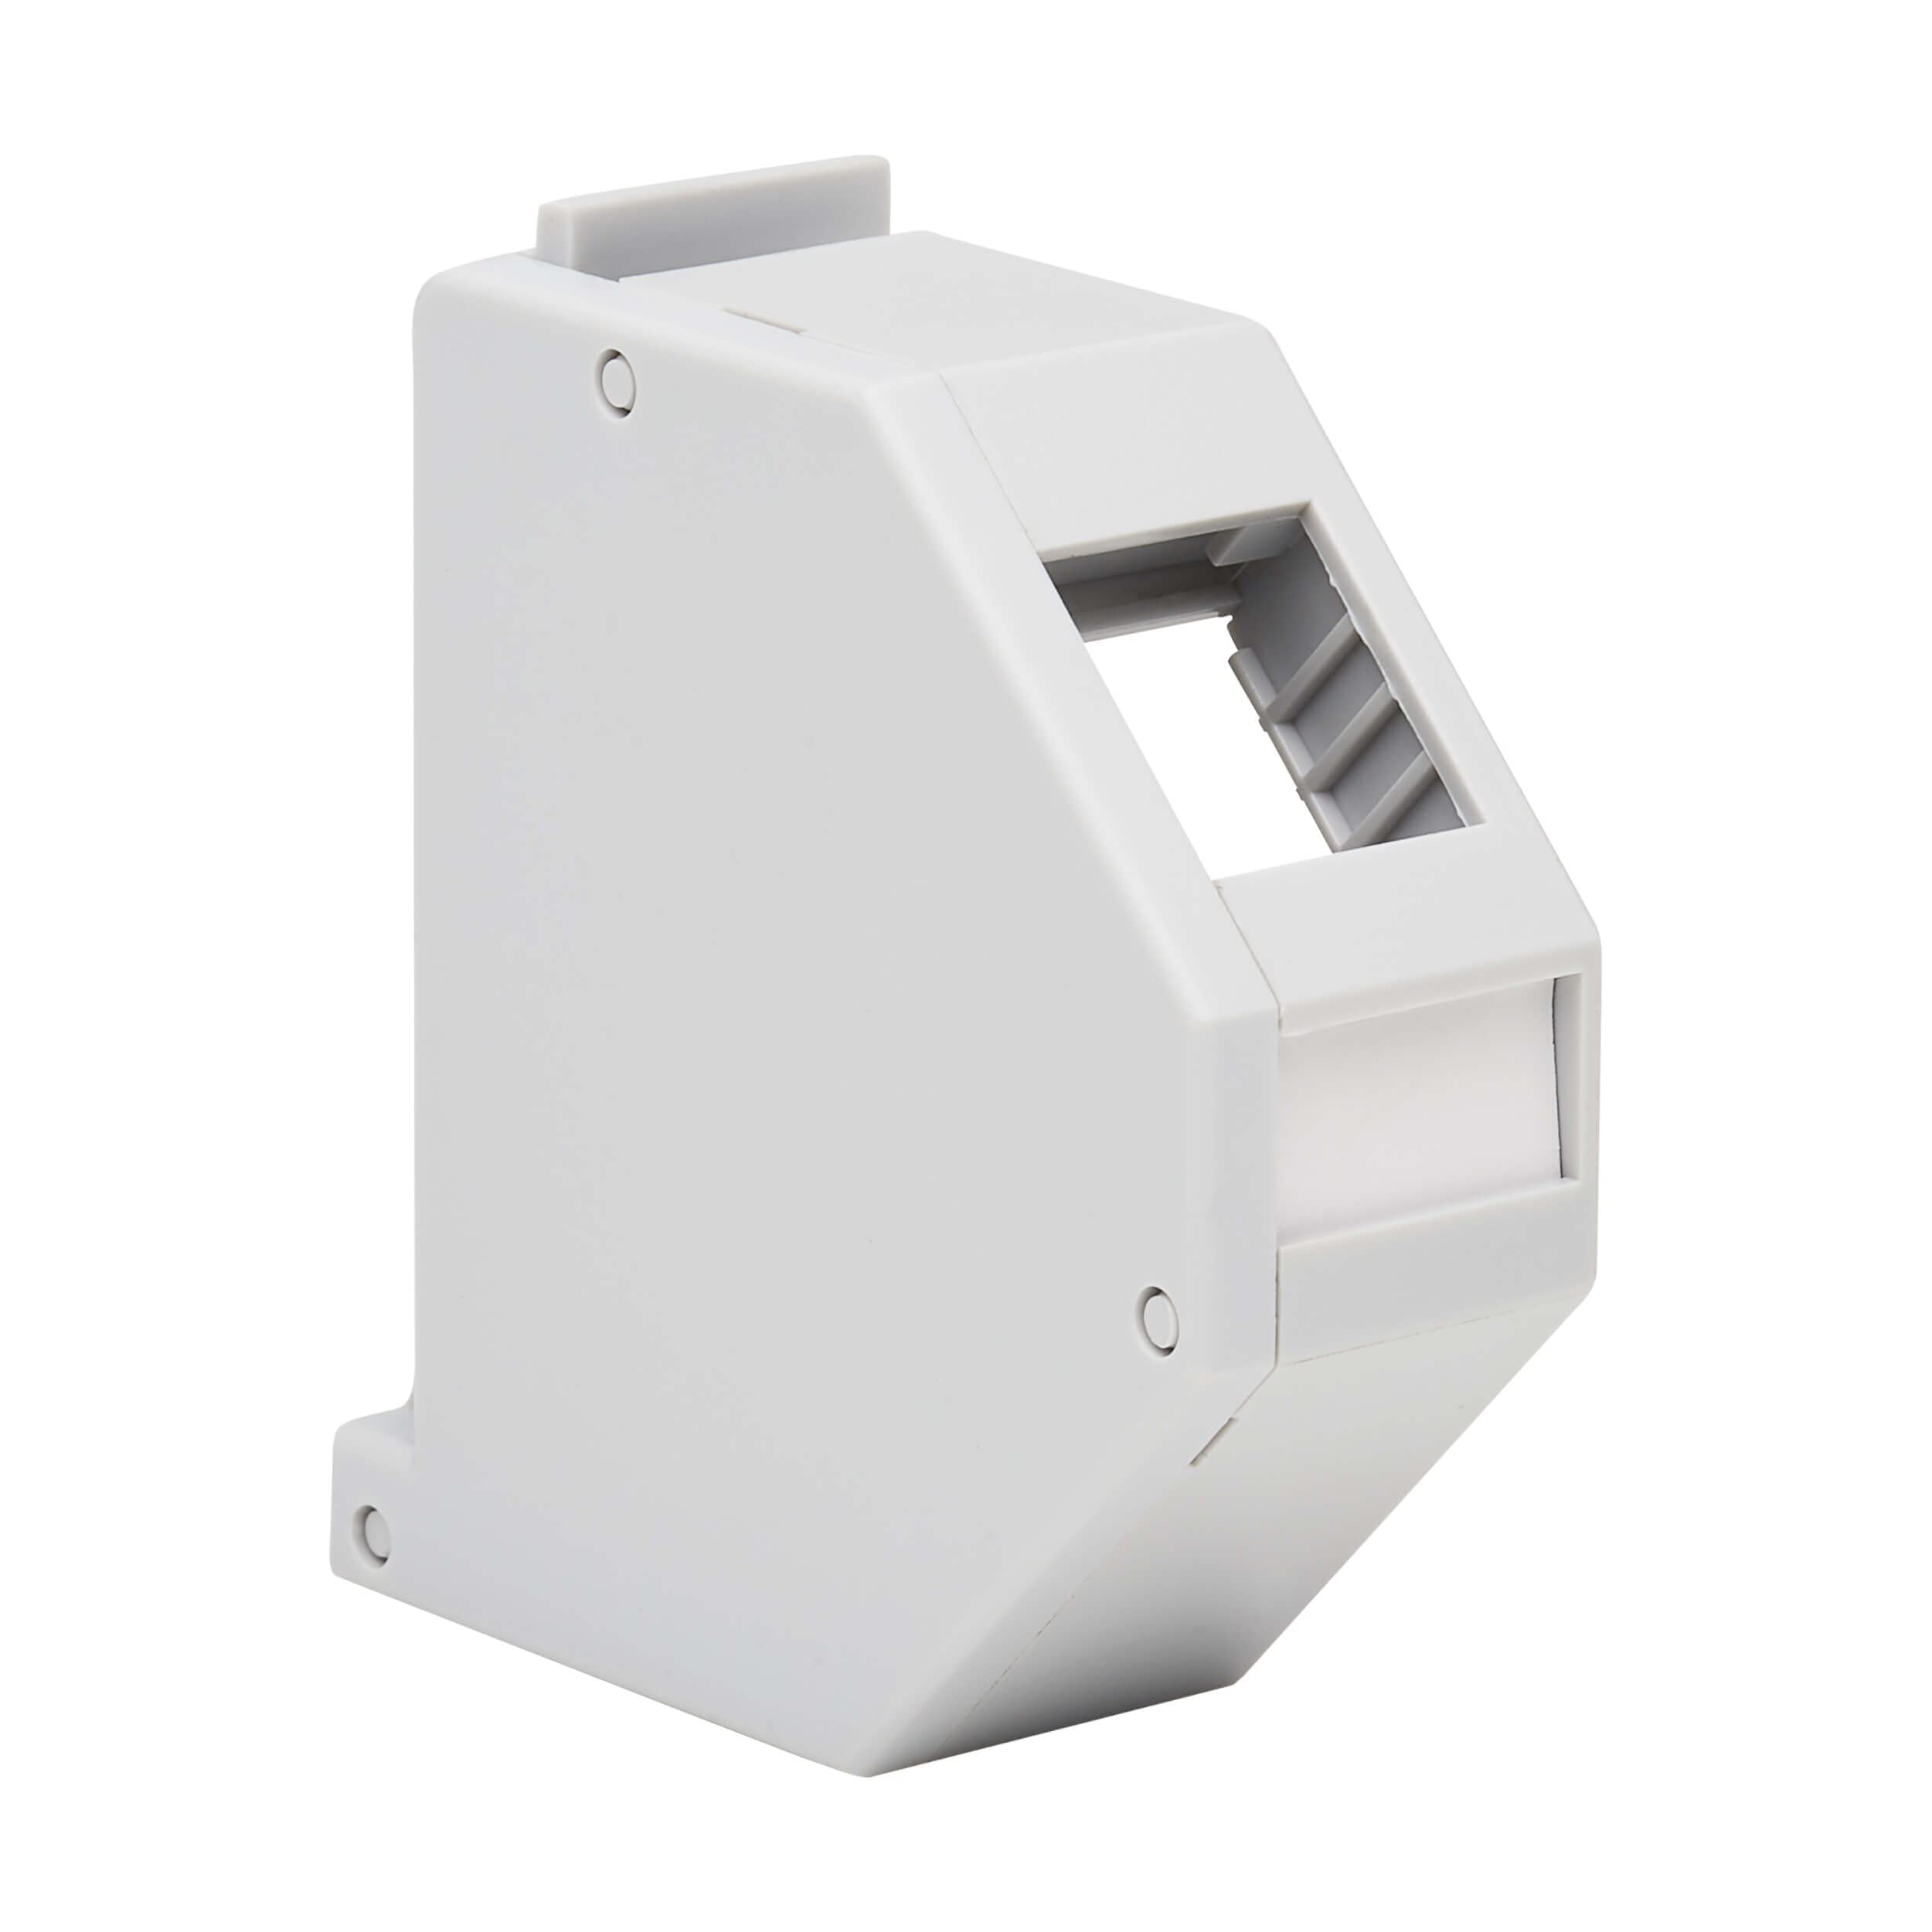 Tripp Lite DIN-Rail Snap-in Keystone Jacks Mounting Enclosure Module Plastic Left Cover & Grounding Contact Spring, Attaches to 35mm DIN Rail, TAA Compliant, Manufacturer's Warranty (N063-001-ENC-K1)